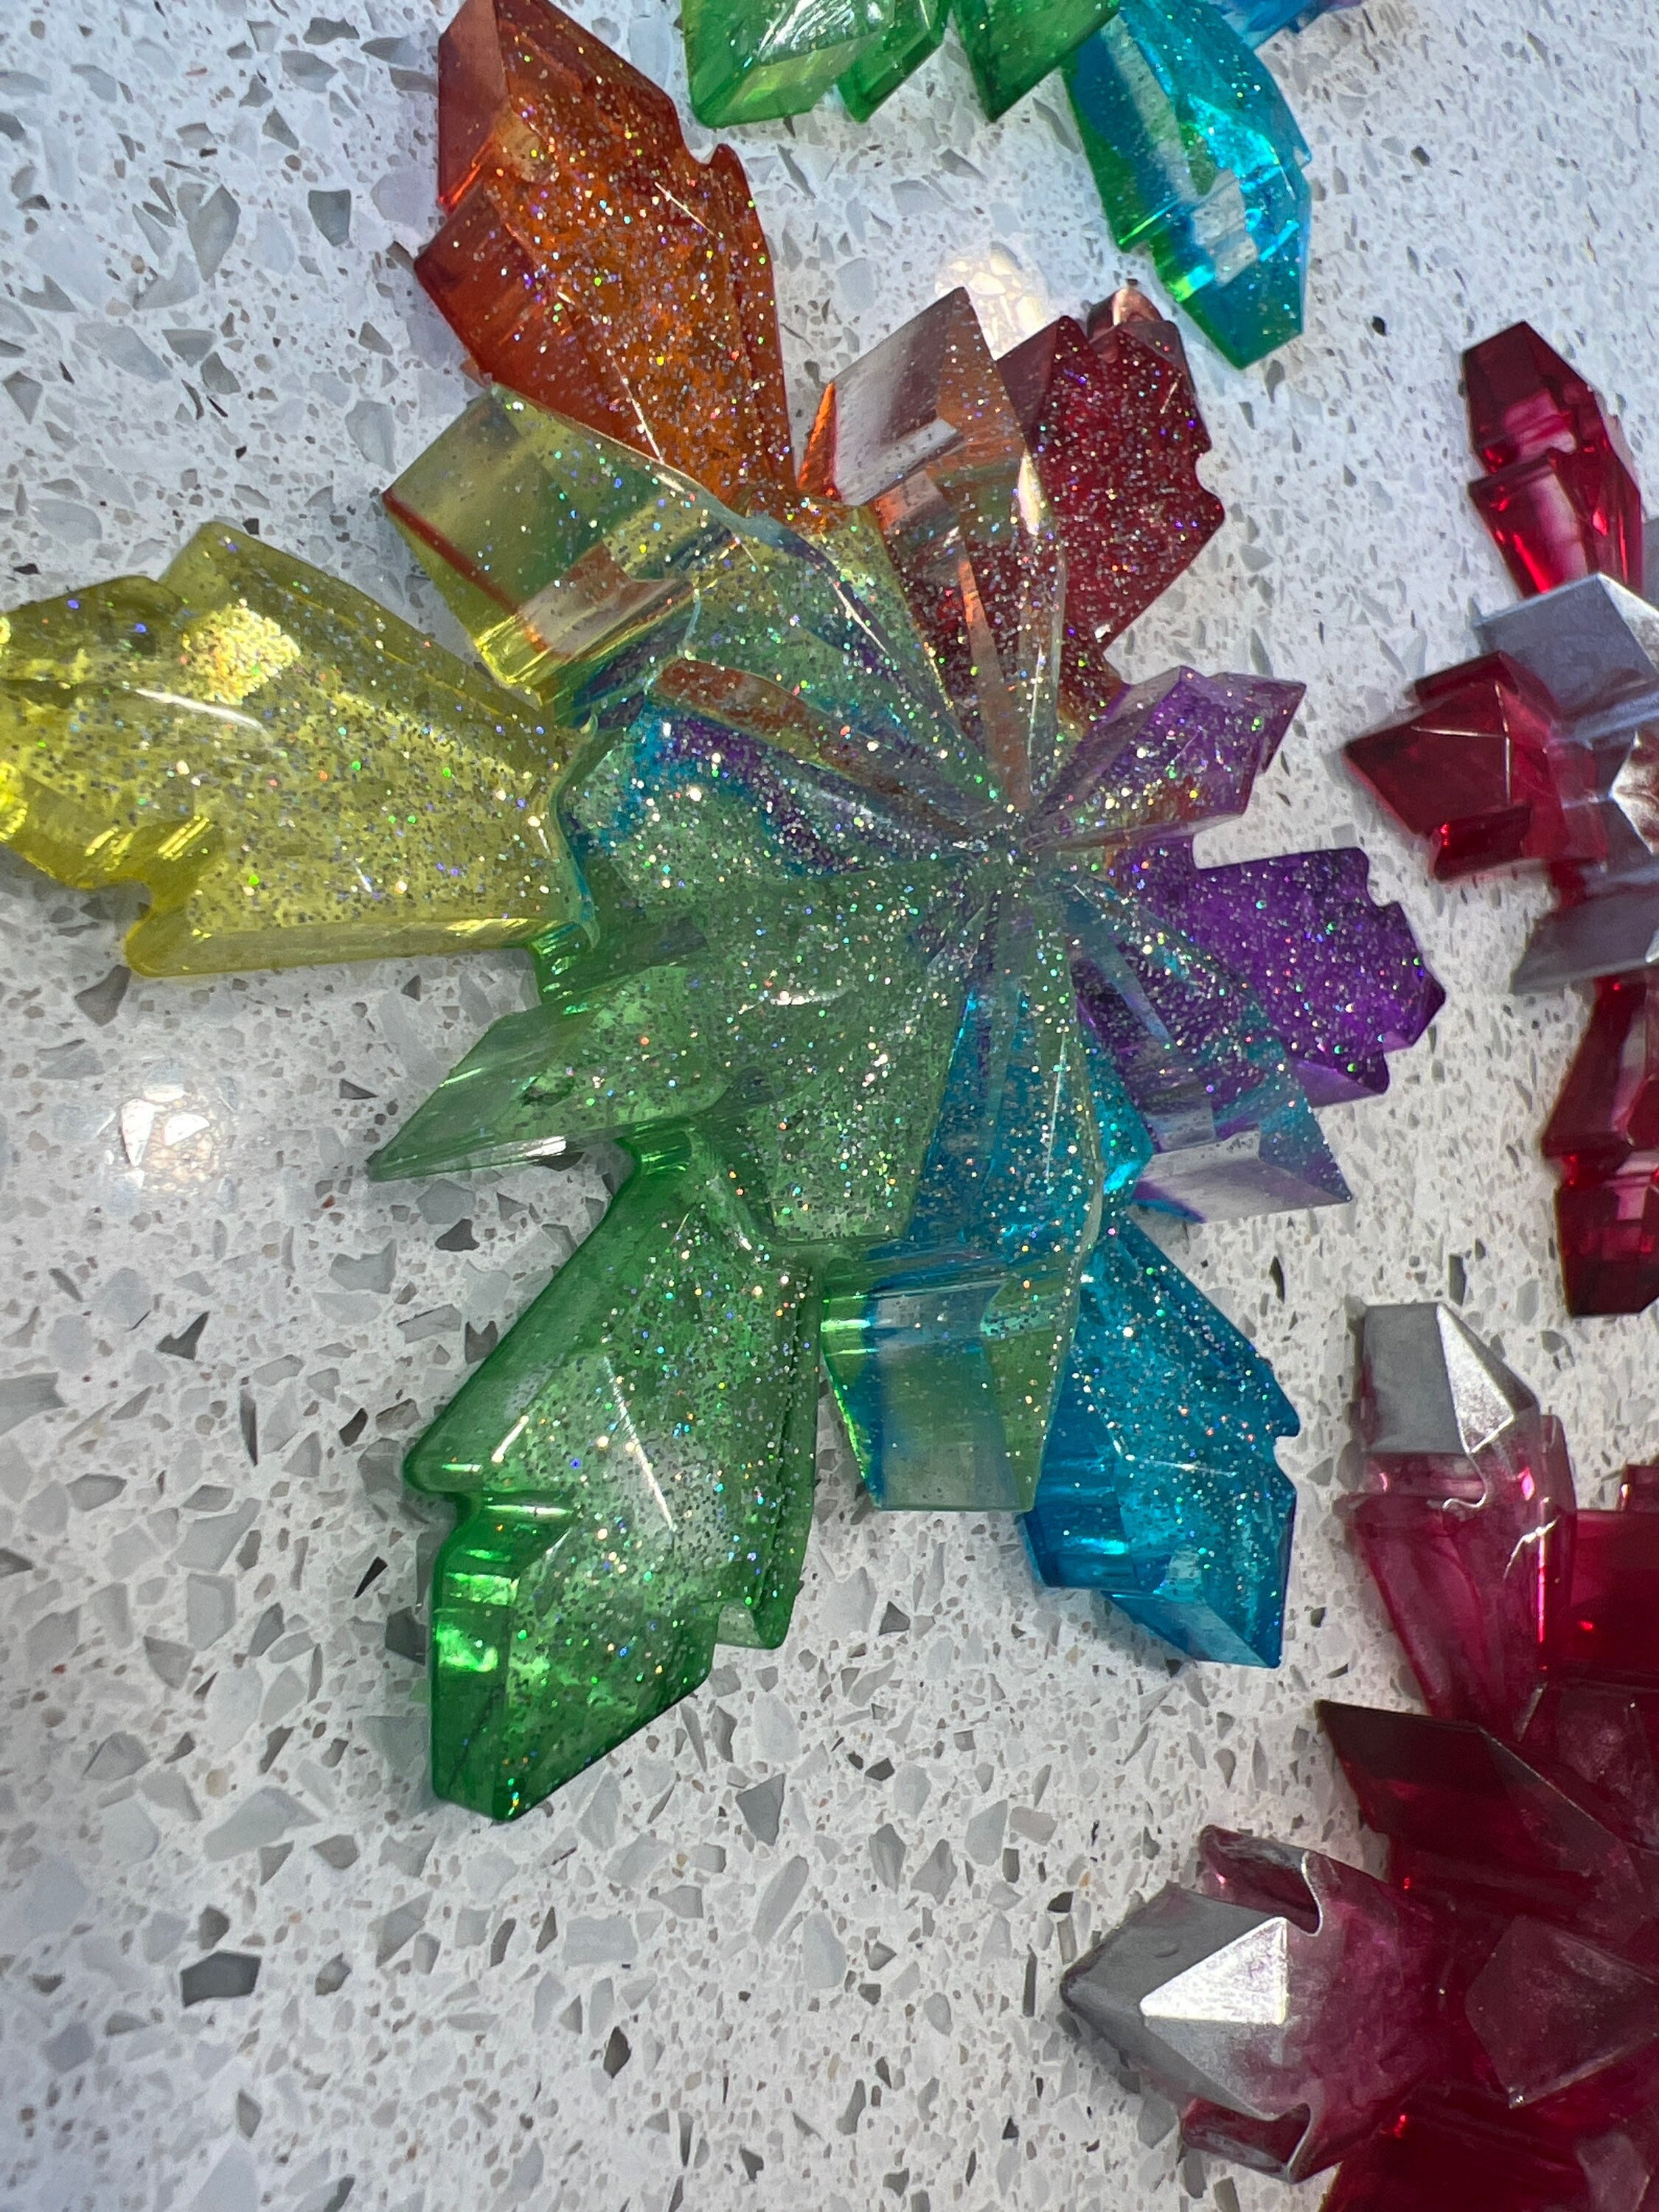 Rainbow Snowflake Charms – The Ornament Girl's Market